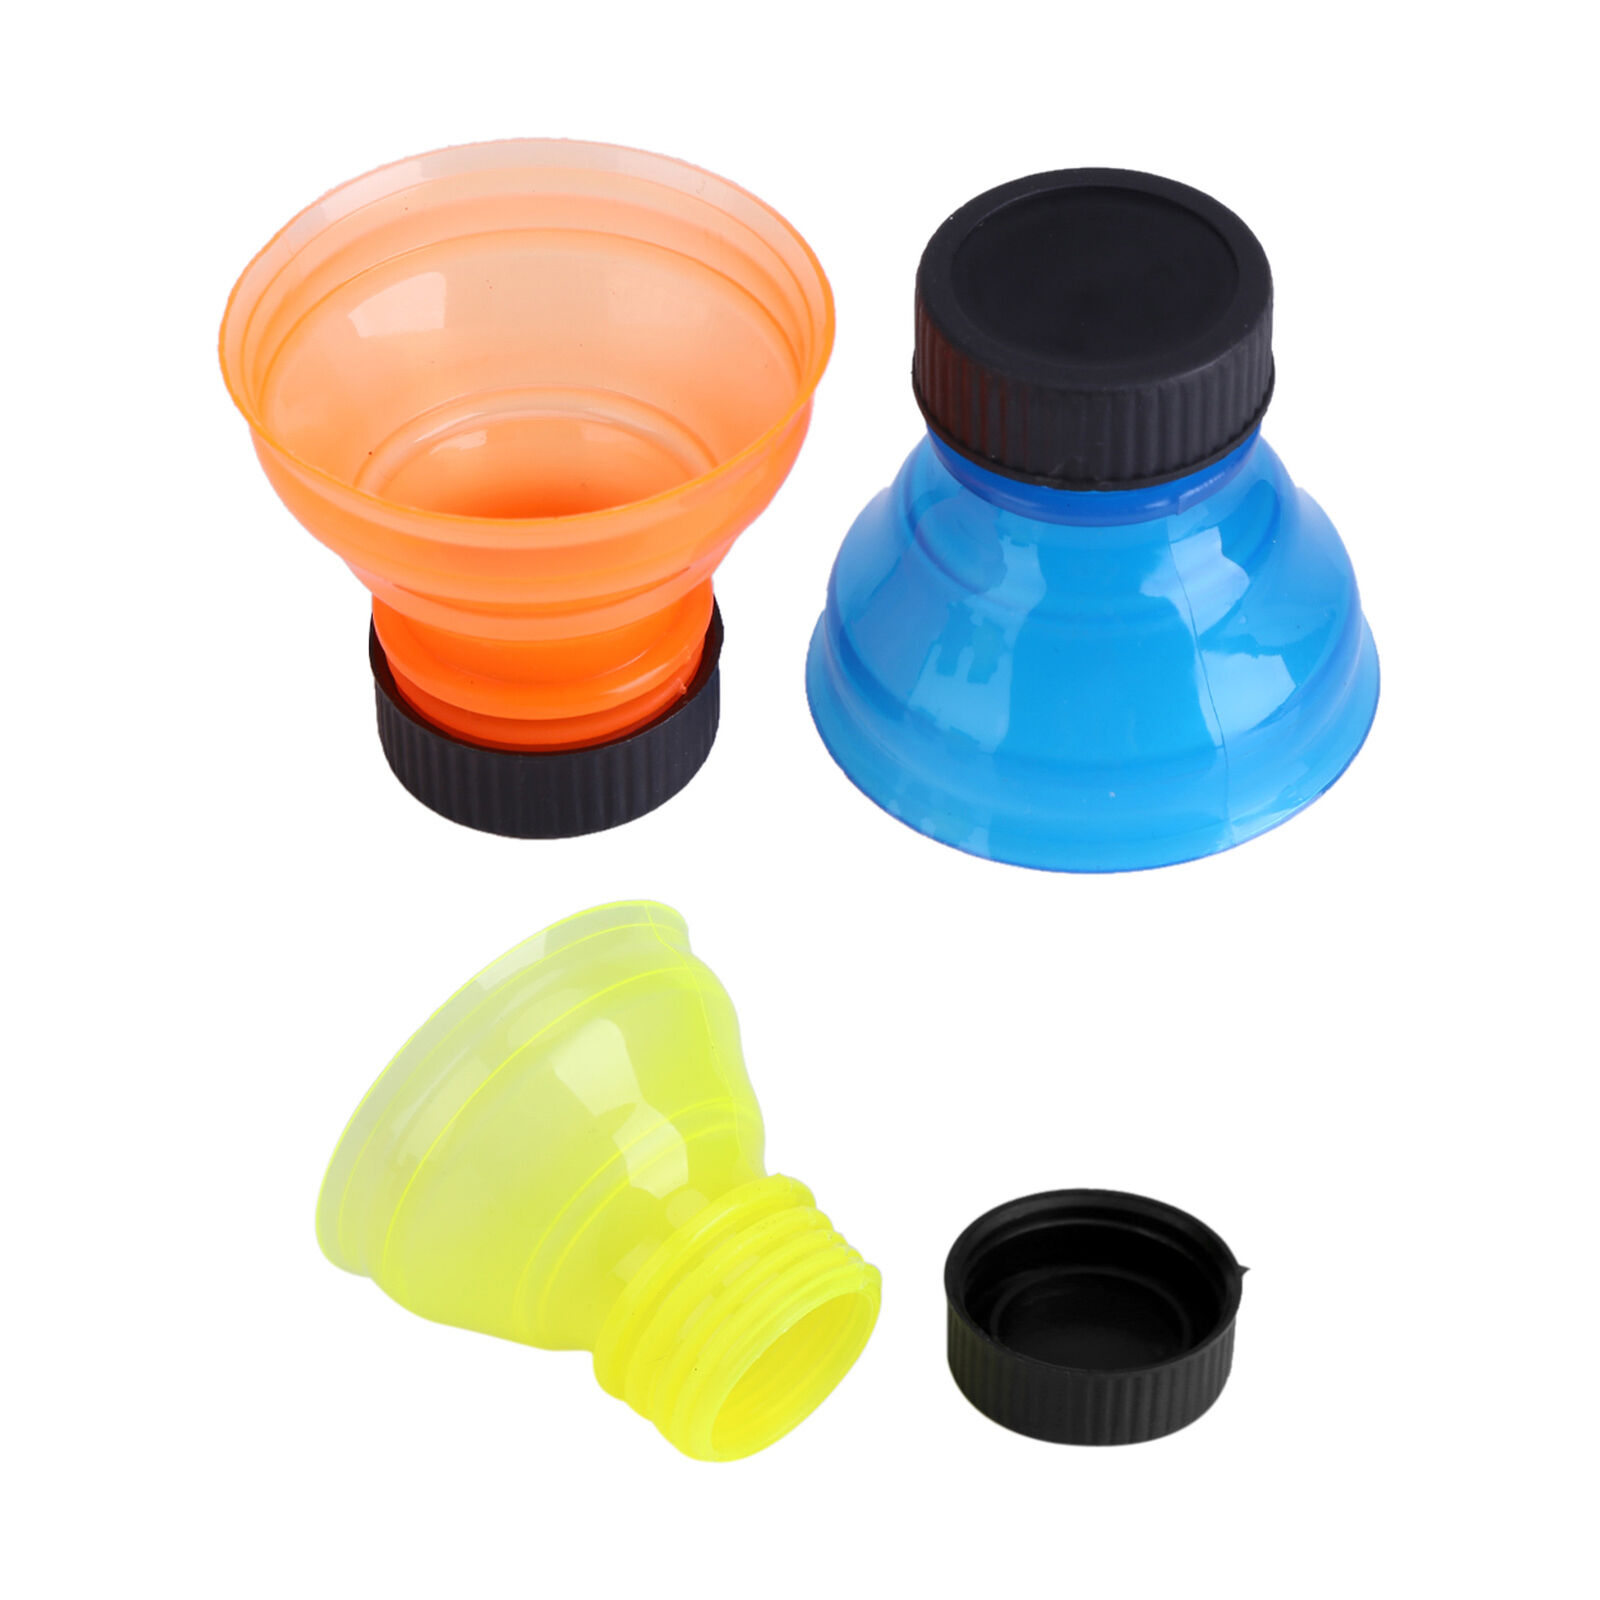 6Pcs Bottle Caps Reusable Bottle Caps For Cool Soda Drink Drink Unbranded Does not apply - фотография #13